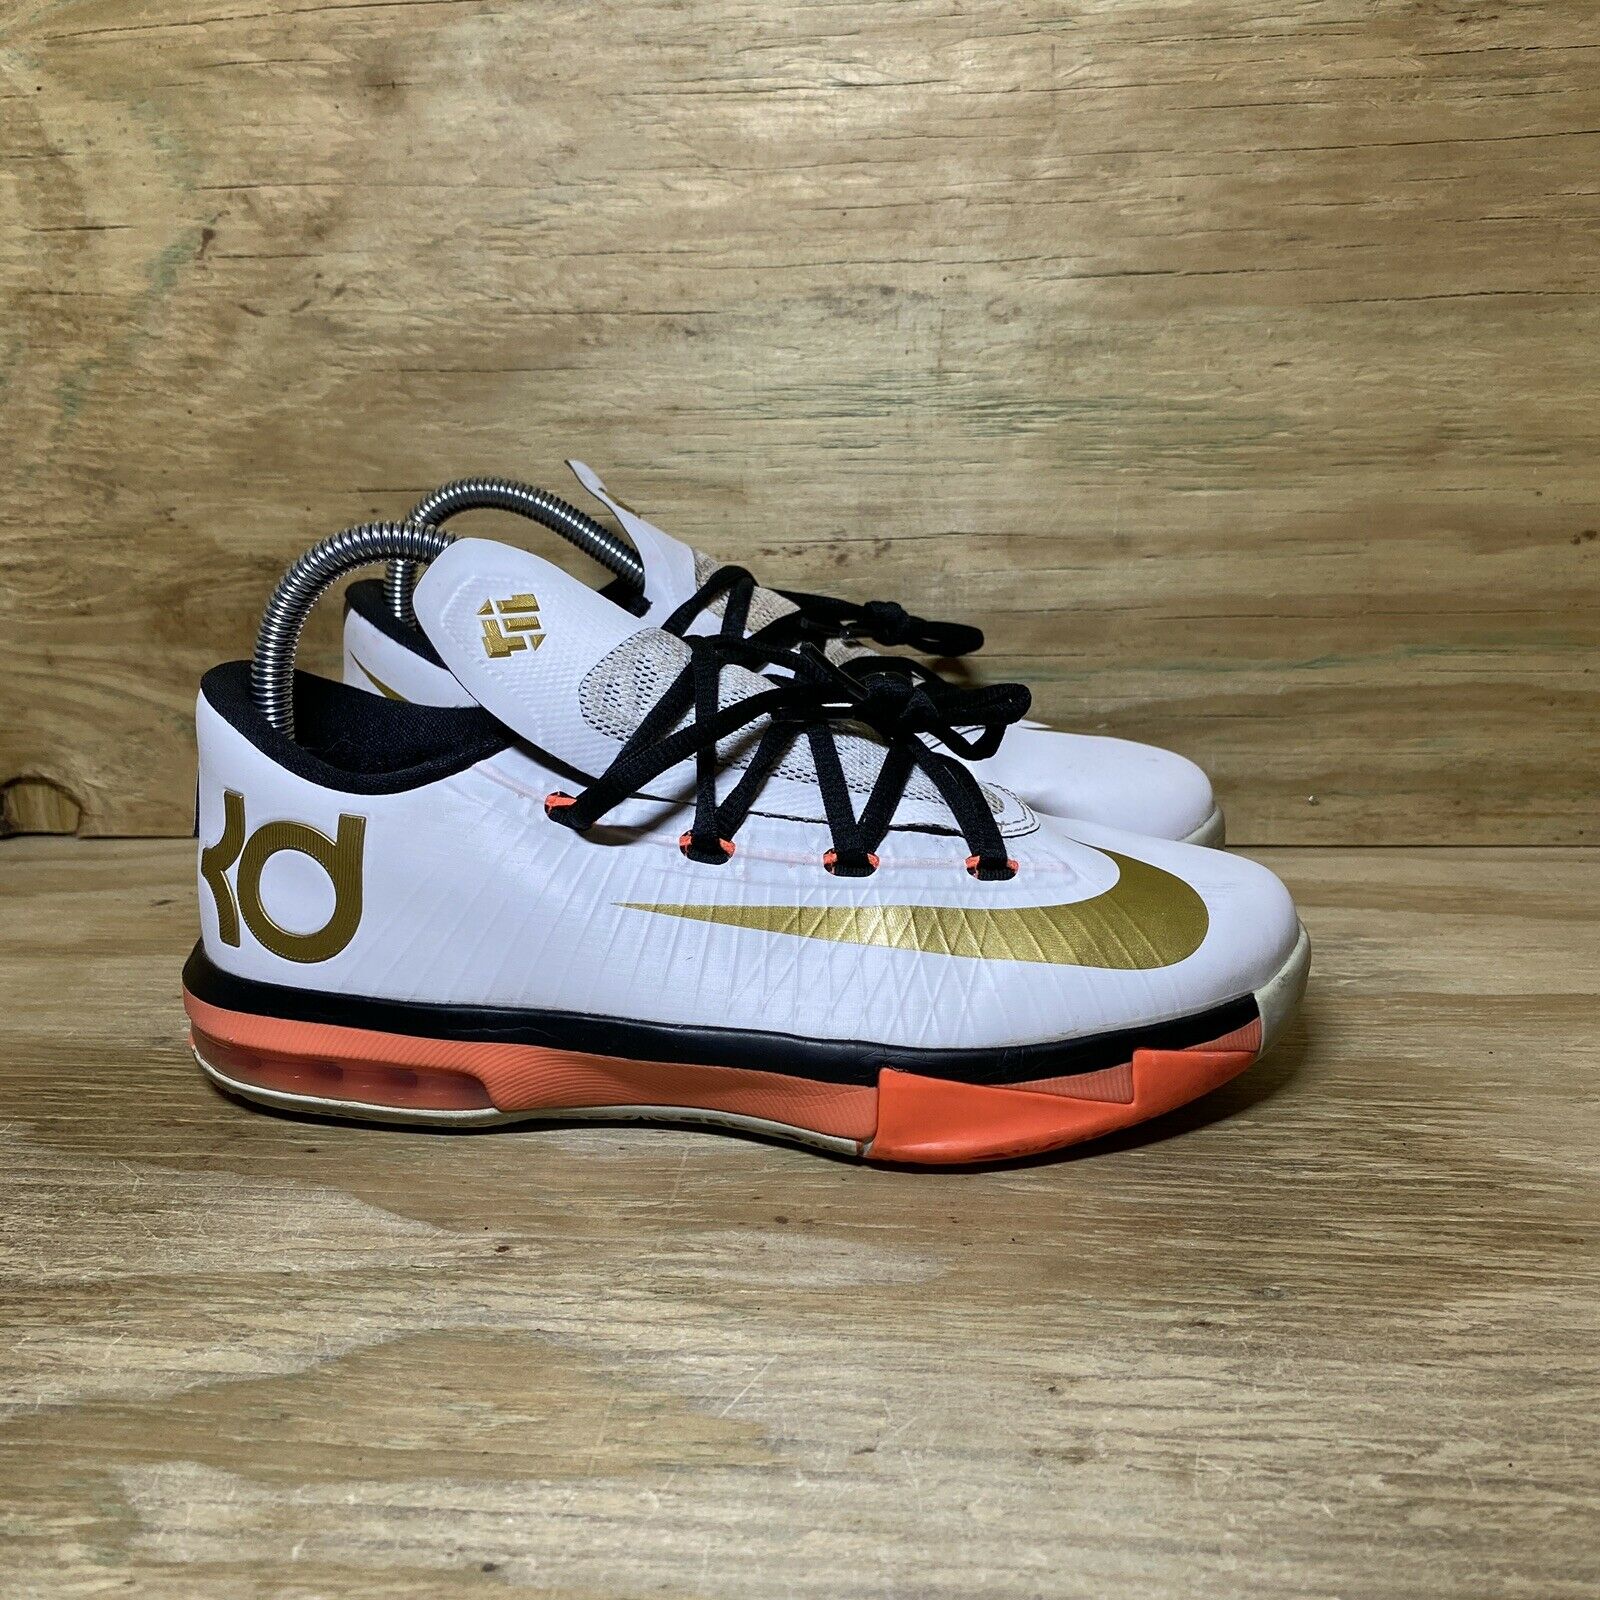 Nike KD 6 Elite Kevin Durant Basketball Shoes Youth Size 6 White 599477-100 *